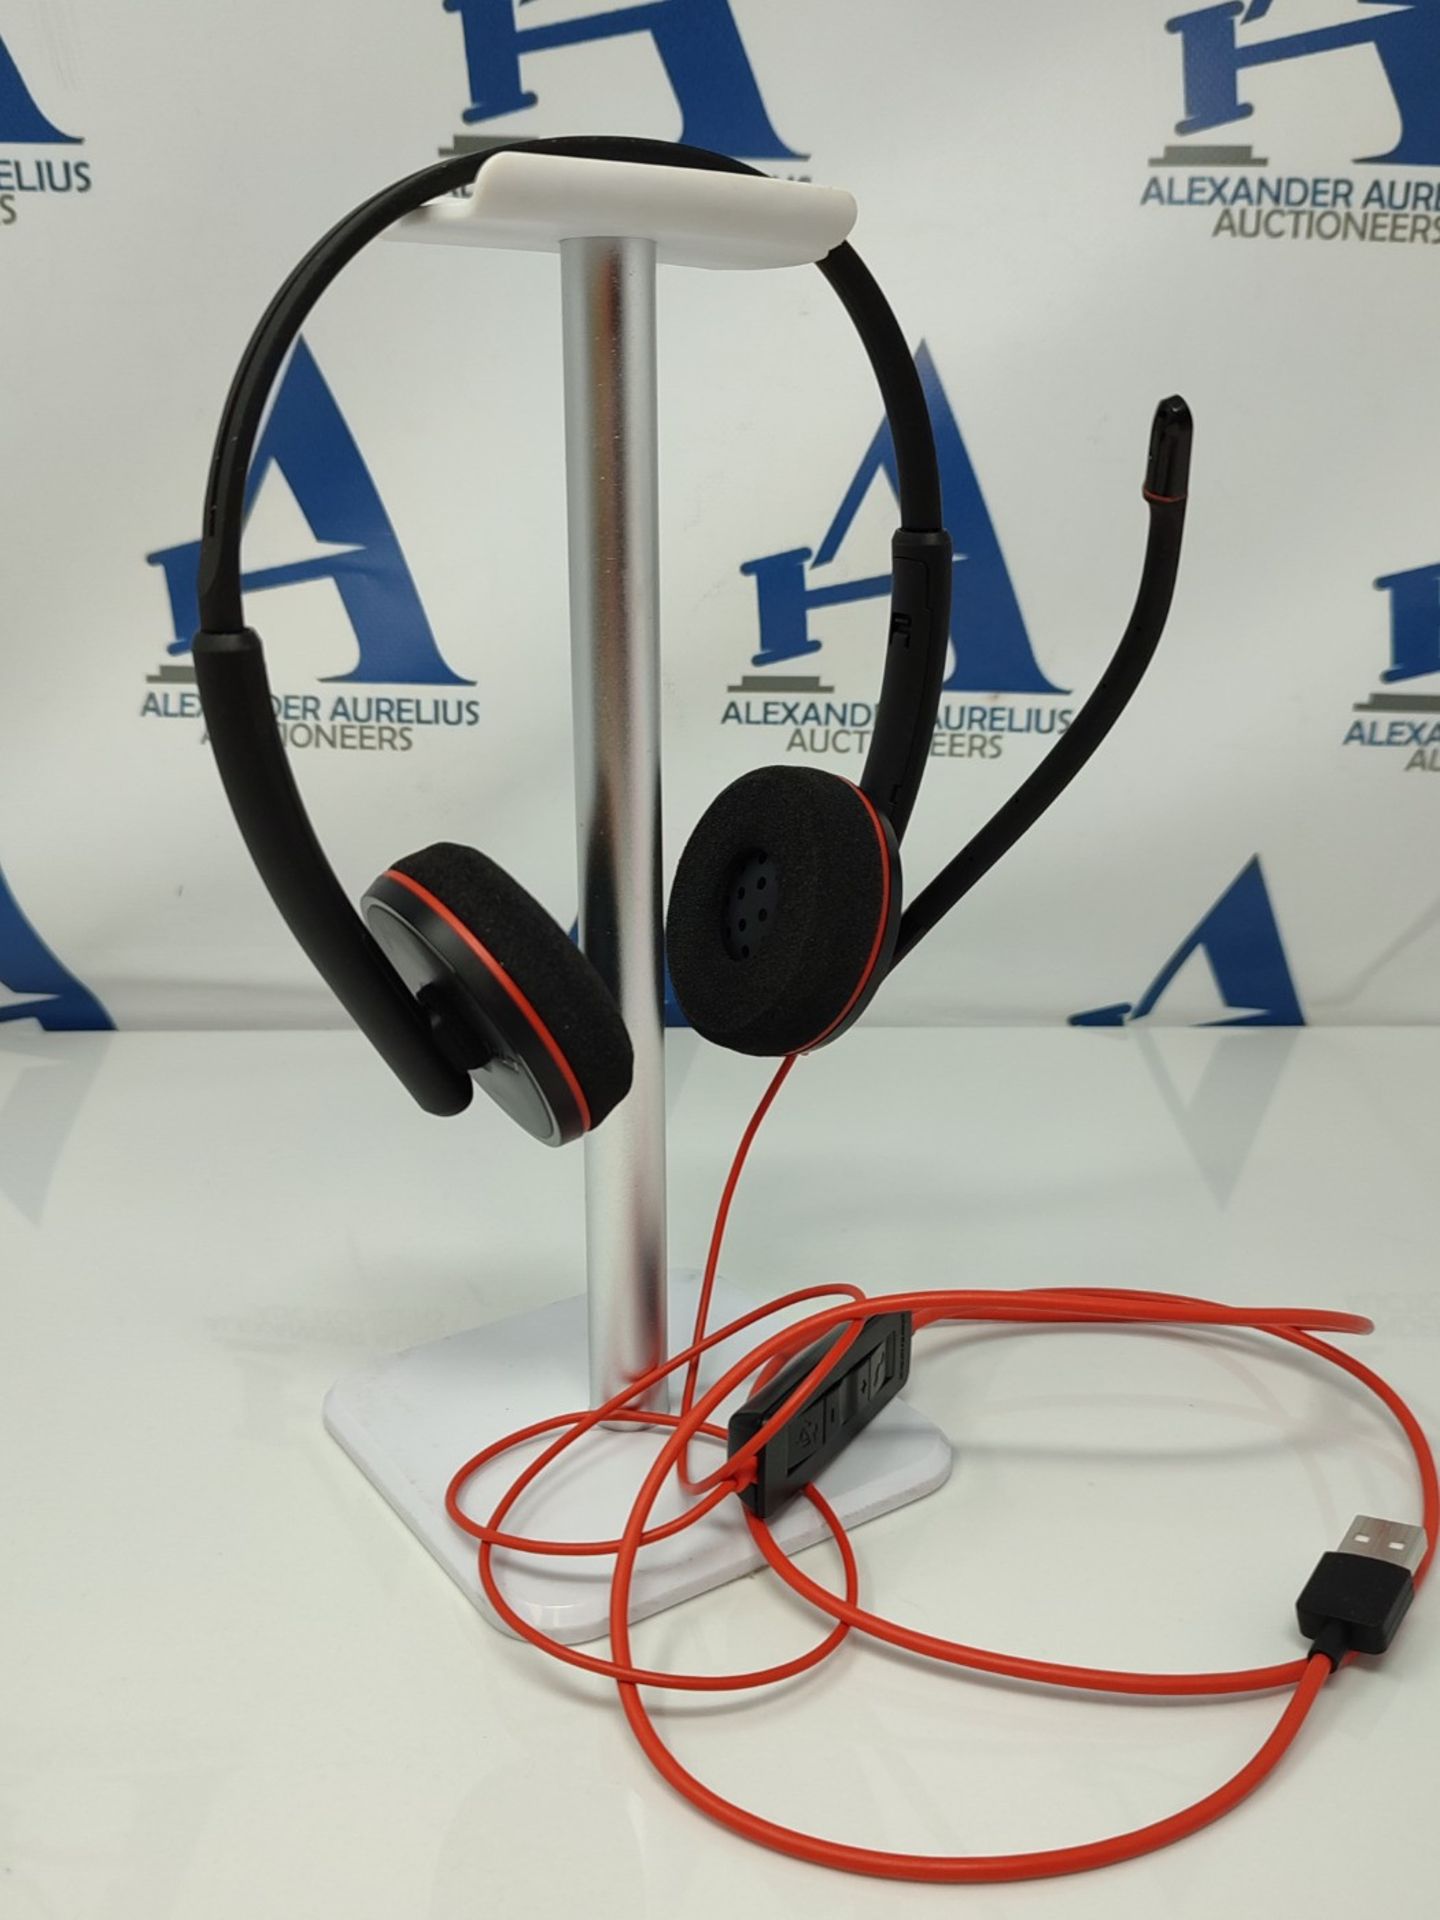 Plantronics - Blackwire 3220 USB-A Wired Headset - Dual Ear (Stereo) with Boom Mic - C - Image 3 of 3